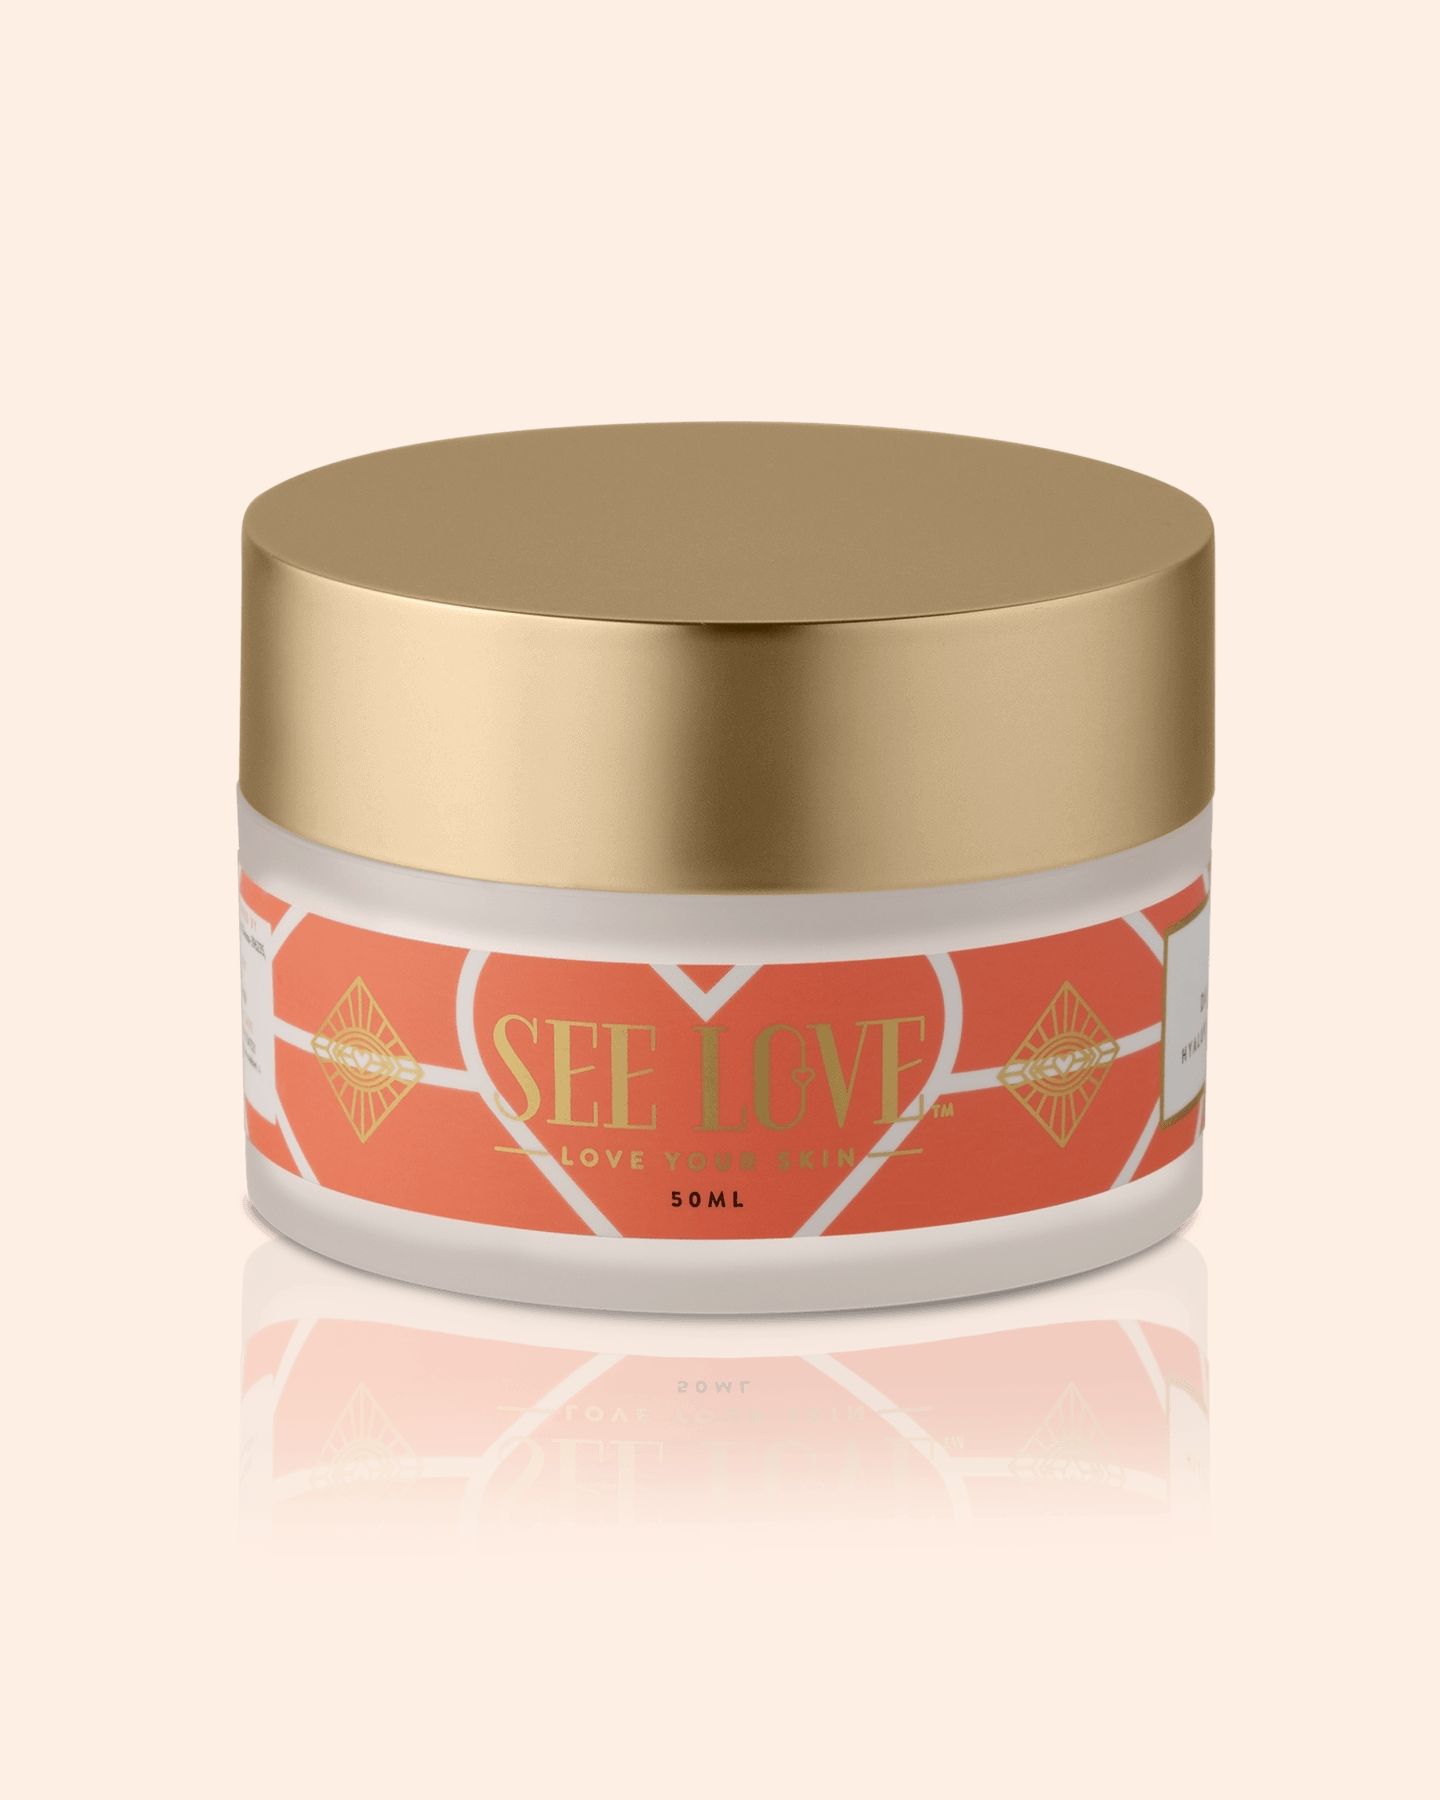 Best Moisturizing Cream for Oily & Combination Skin | See Love